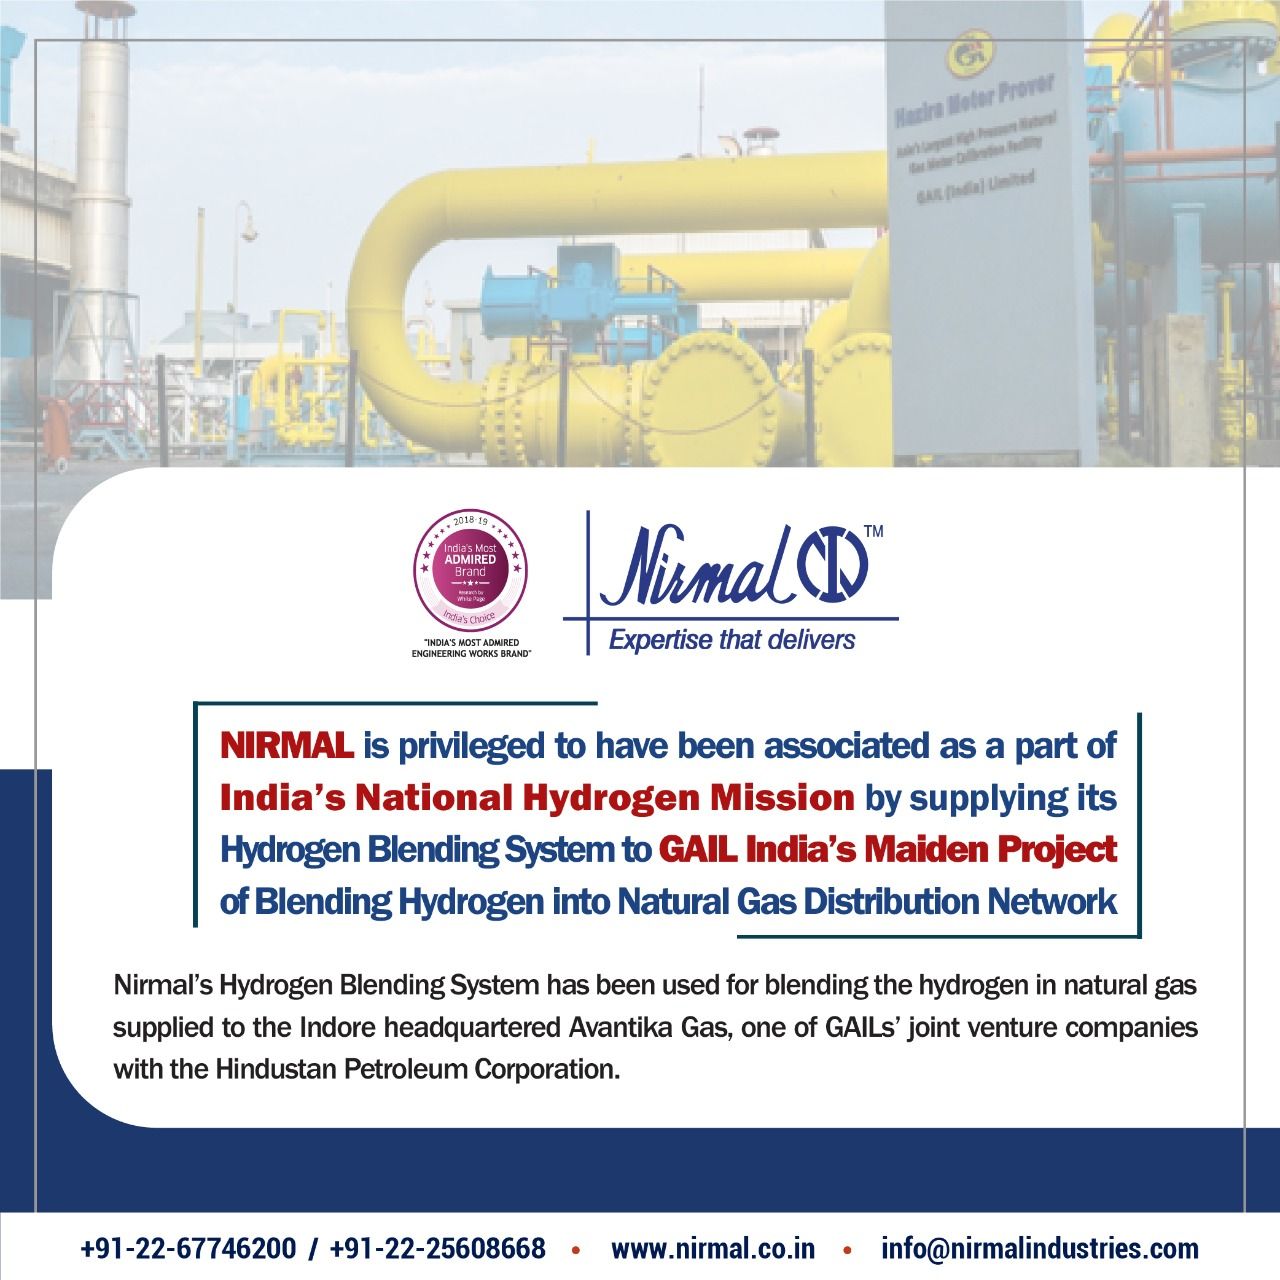 NIRMAL is privileged to have been associated as a part of India’s National Hydrogen Mission.